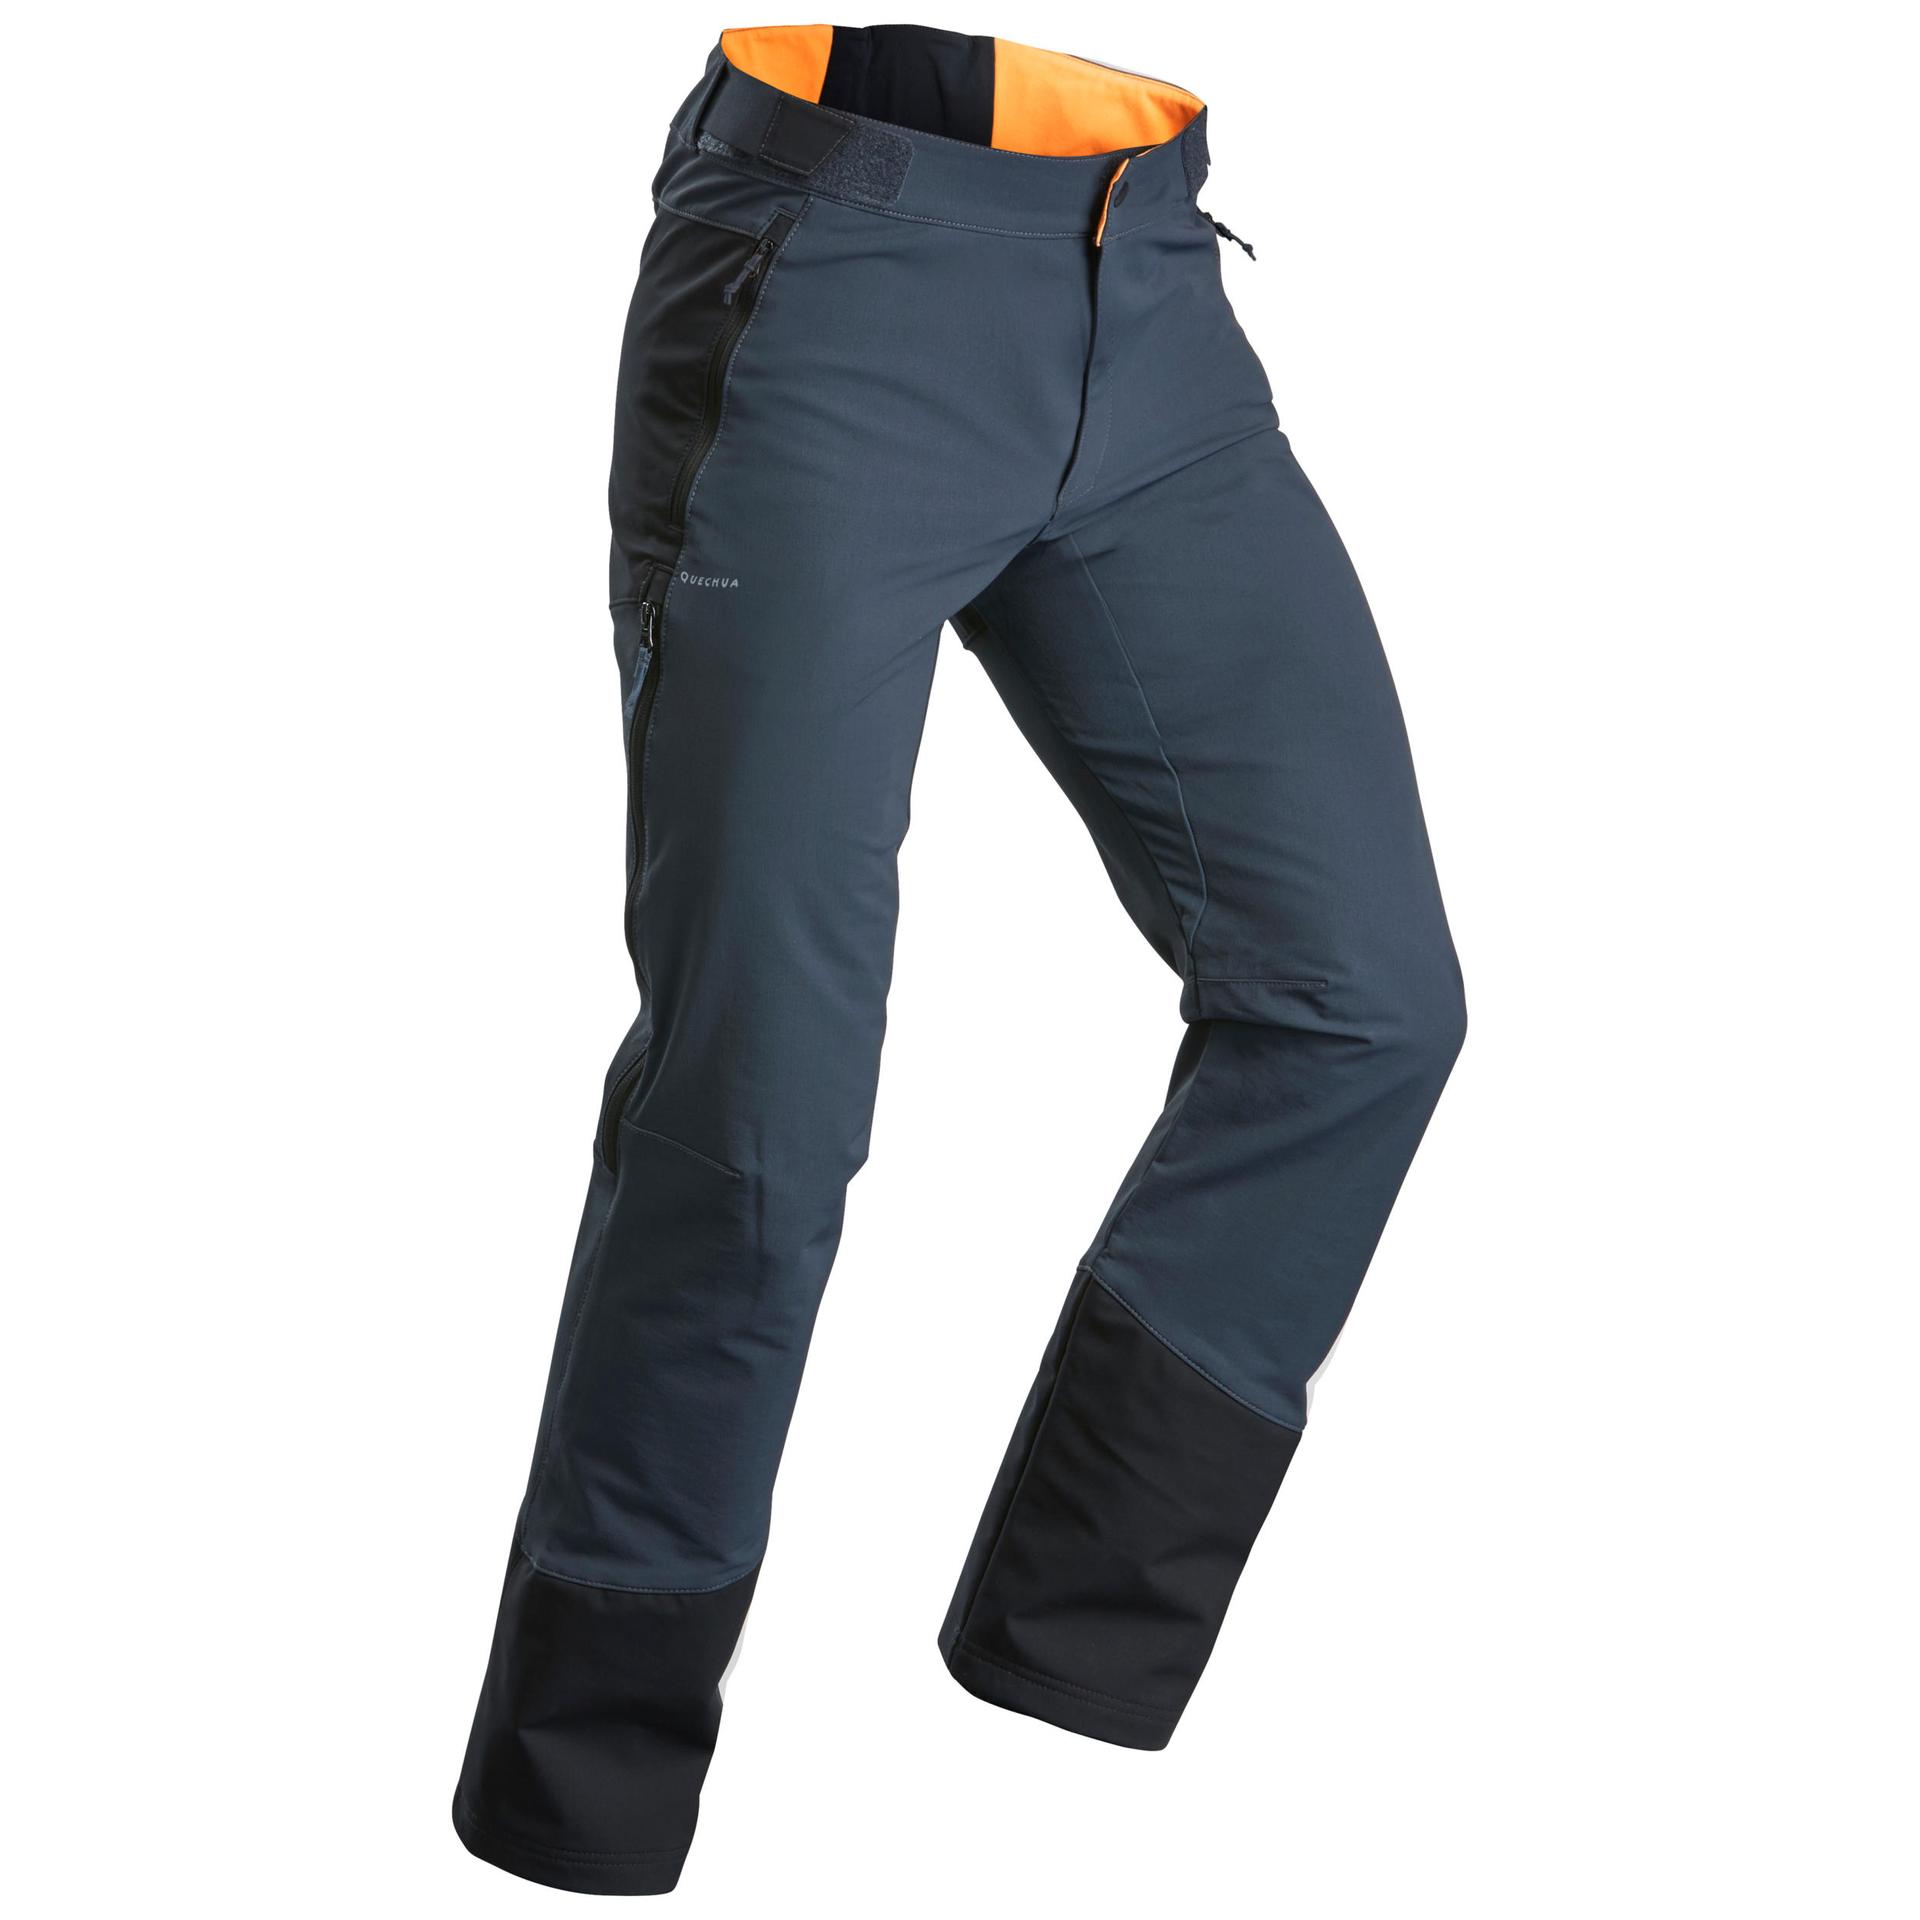 men's warm water-repellent stretch hiking trousers with gaiters - sh520 x-warm